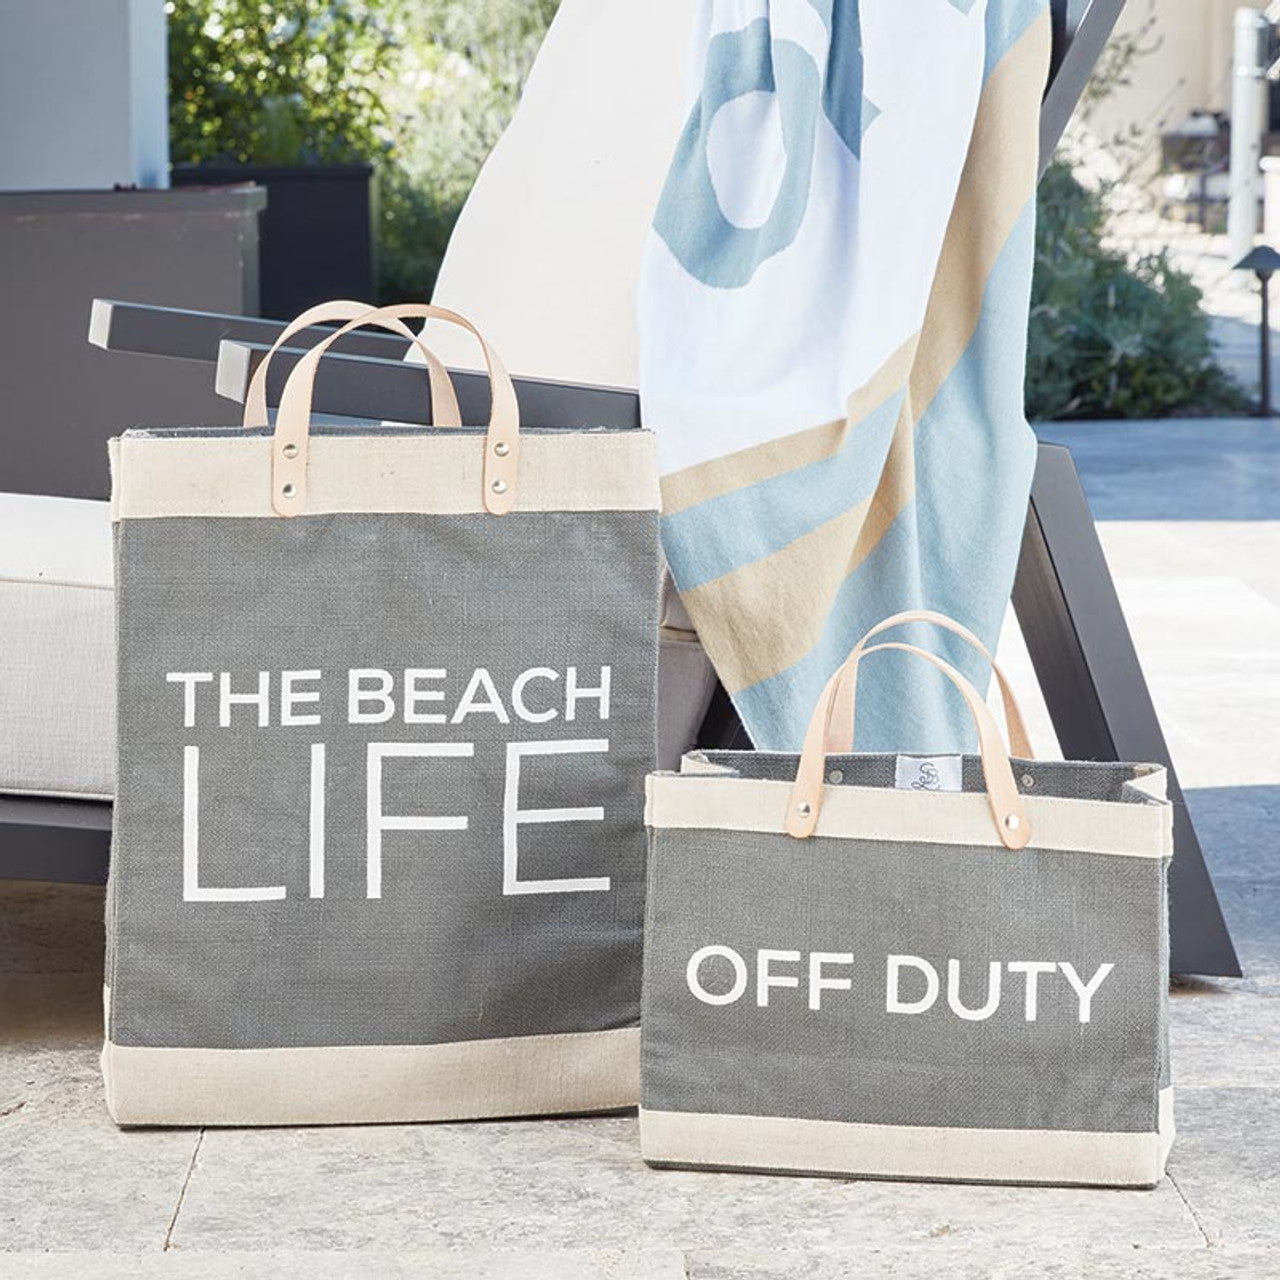 Newport Tall Market Tote in Gray, Bag for Beach, The Beach Life